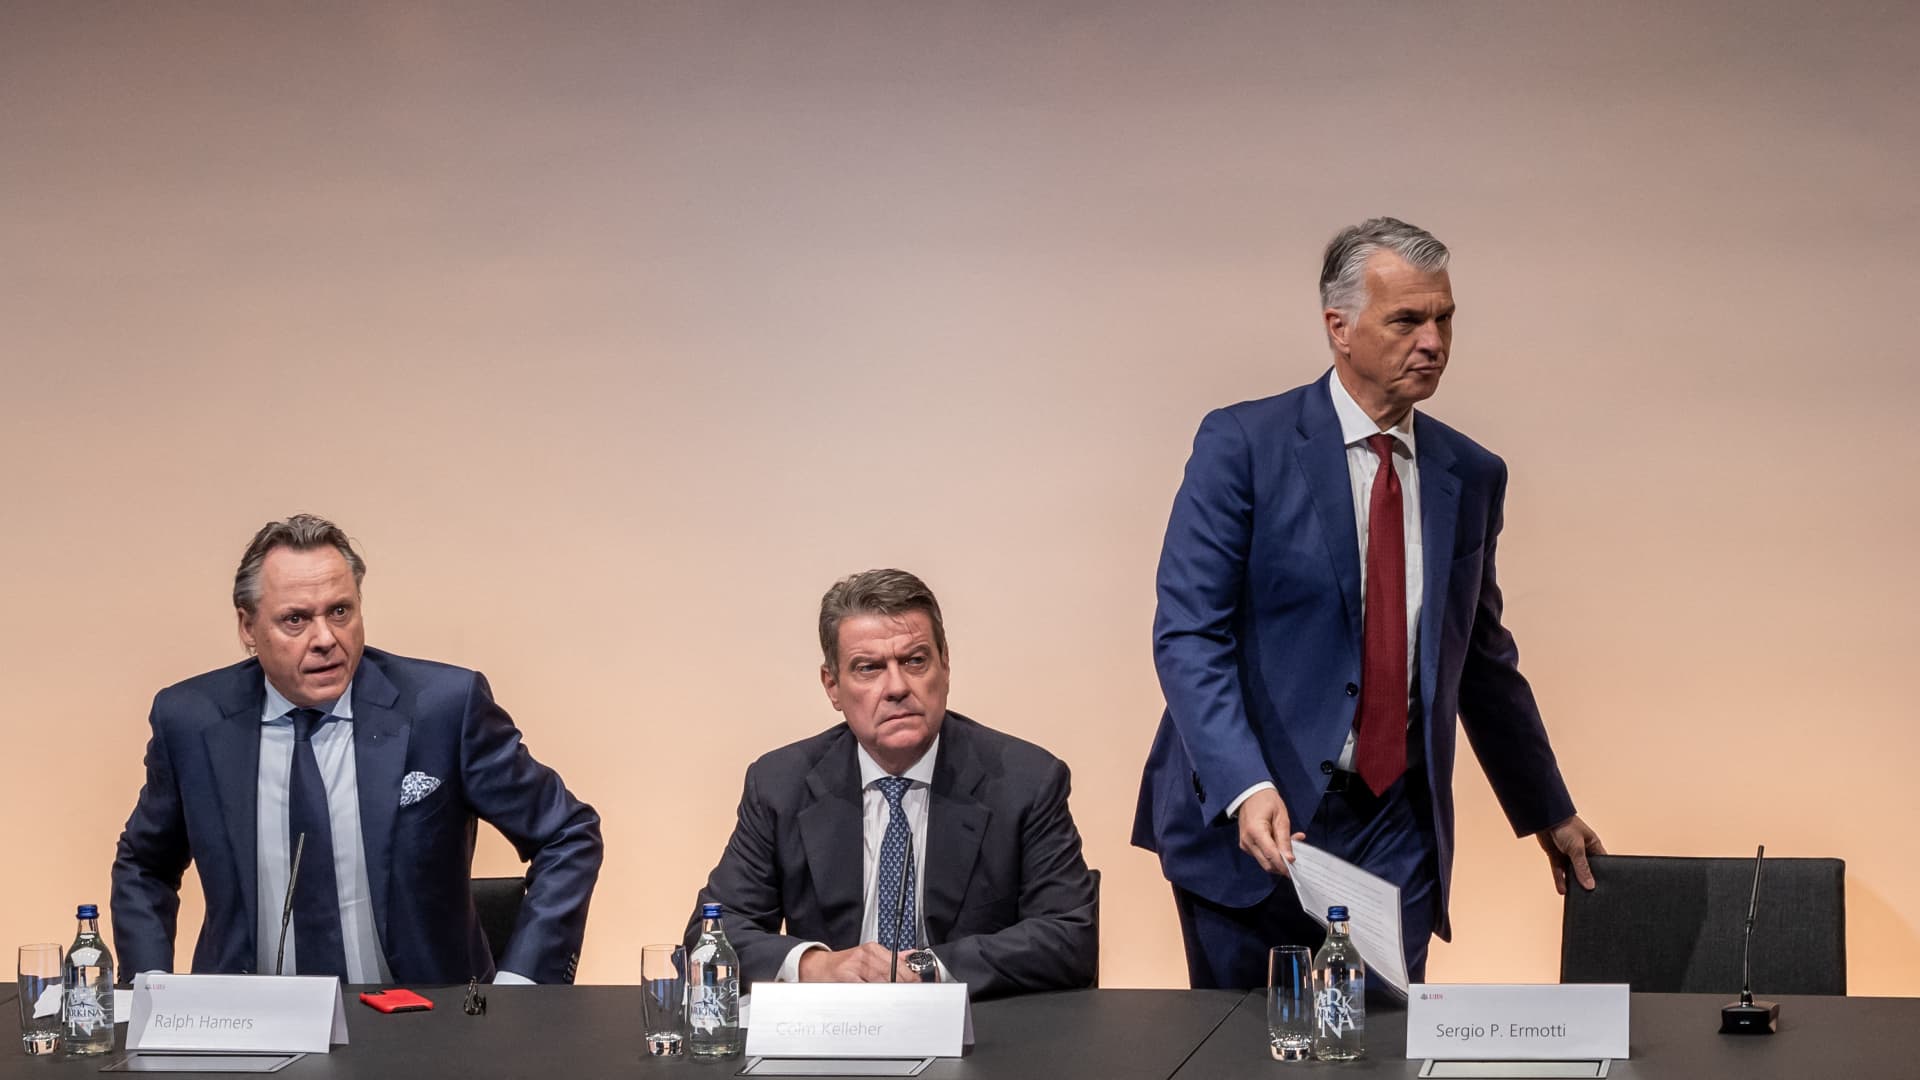 Newly appointed UBS CEO Sergio Ermotti (R) arrives next to UBS Chairman Colm Kelleher (C) and outgoing CEO Ralph Hamers during a press conference in Zurich on March 29, 2023.